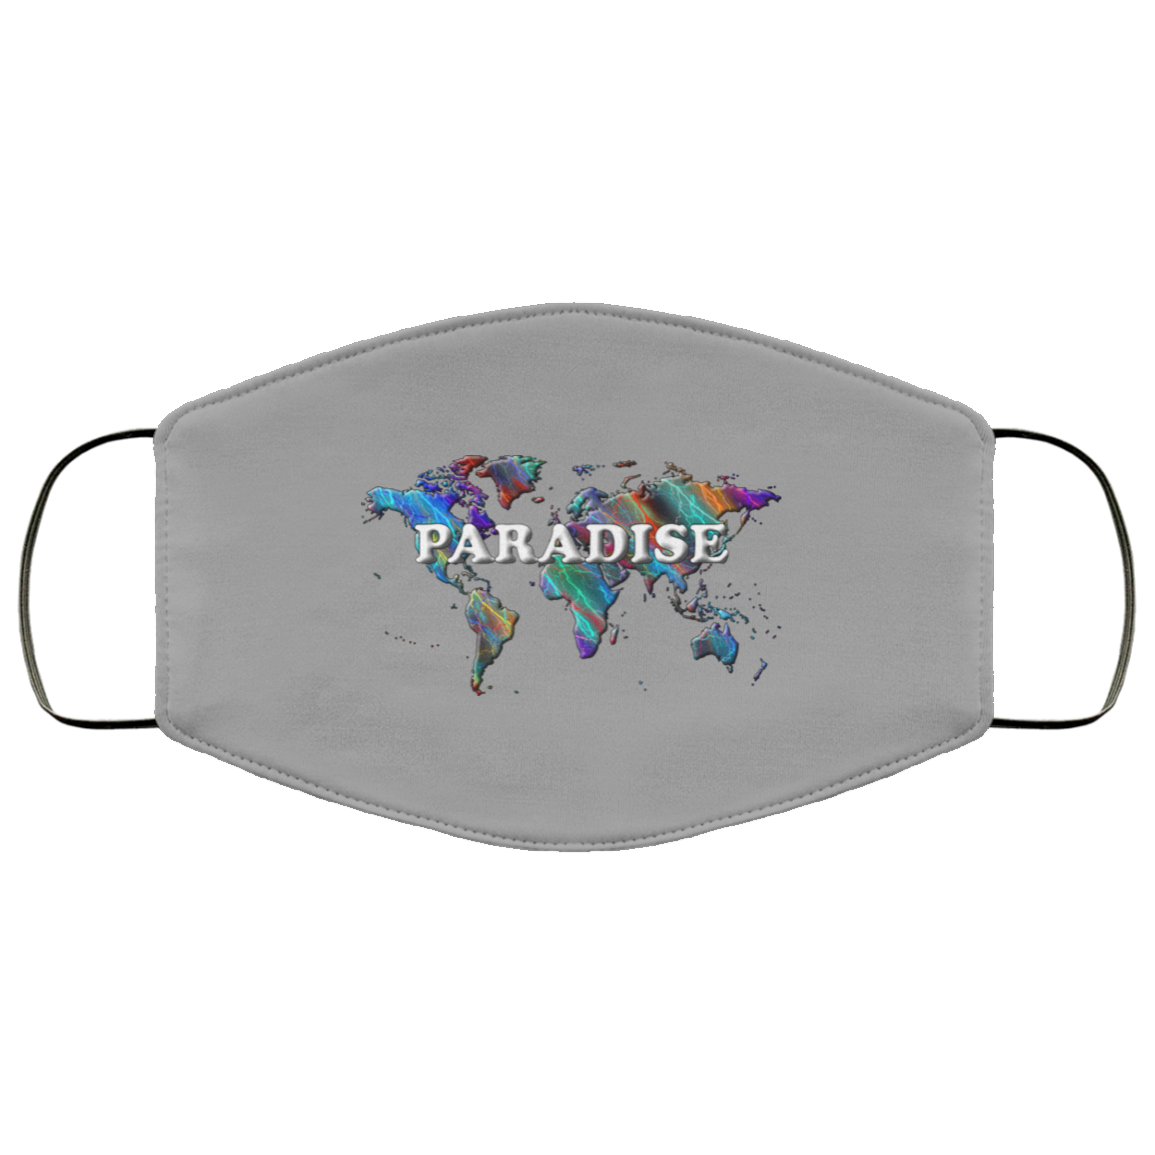 Paradise 2 Layer Protective Mask